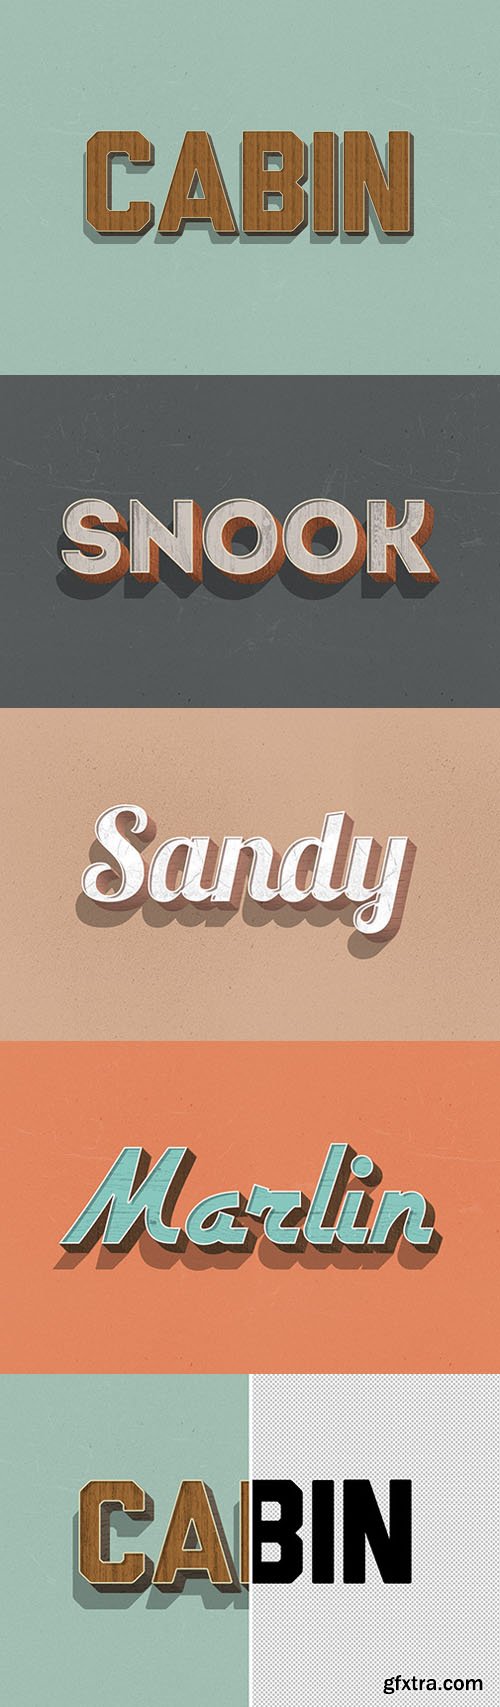 Retro 3D Wood PSD Text Effects